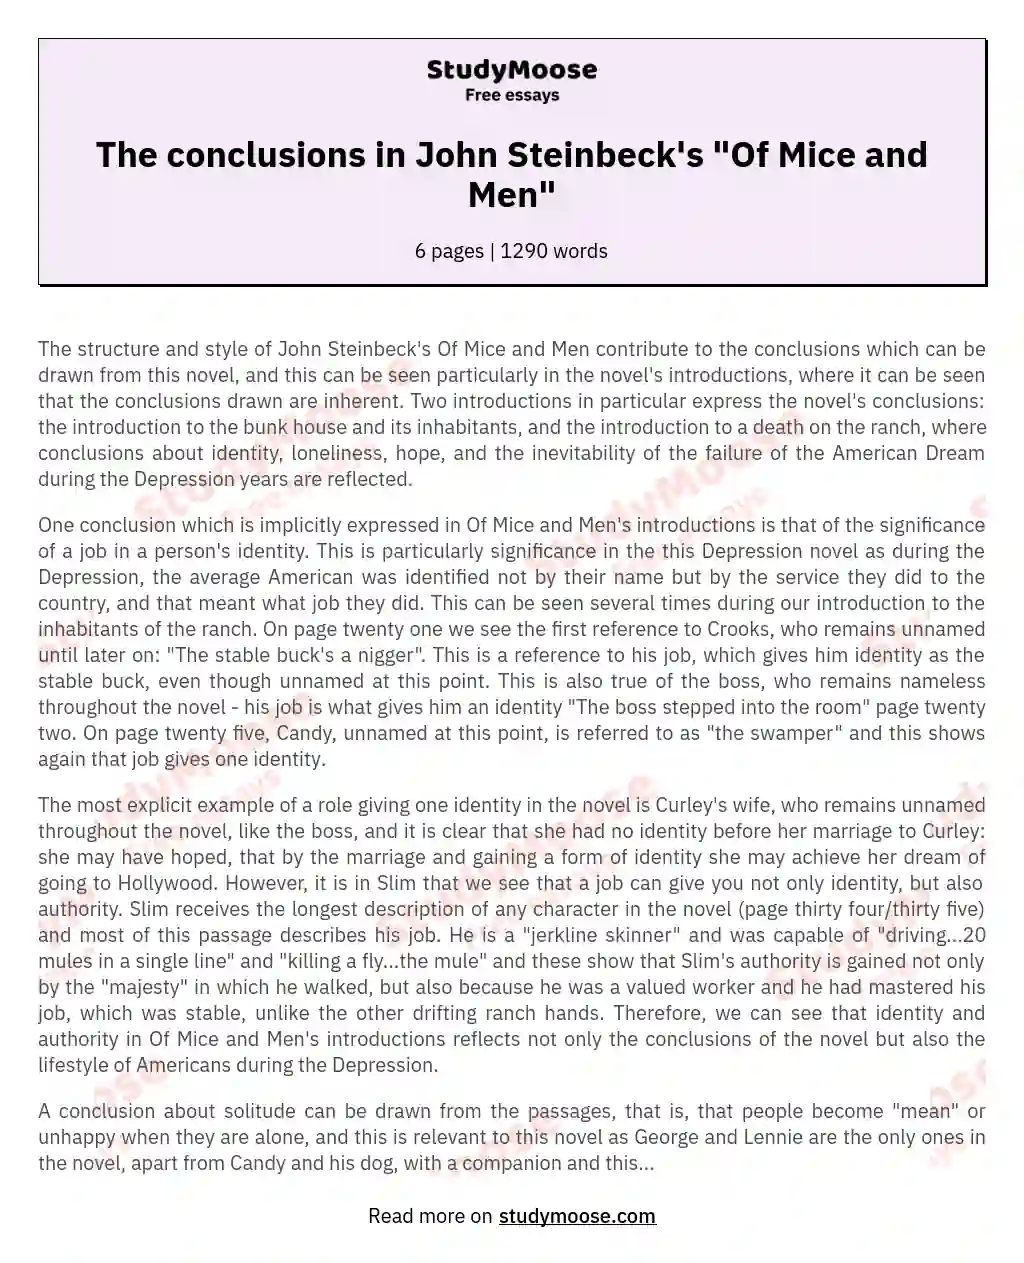 The conclusions in John Steinbeck's "Of Mice and Men" essay